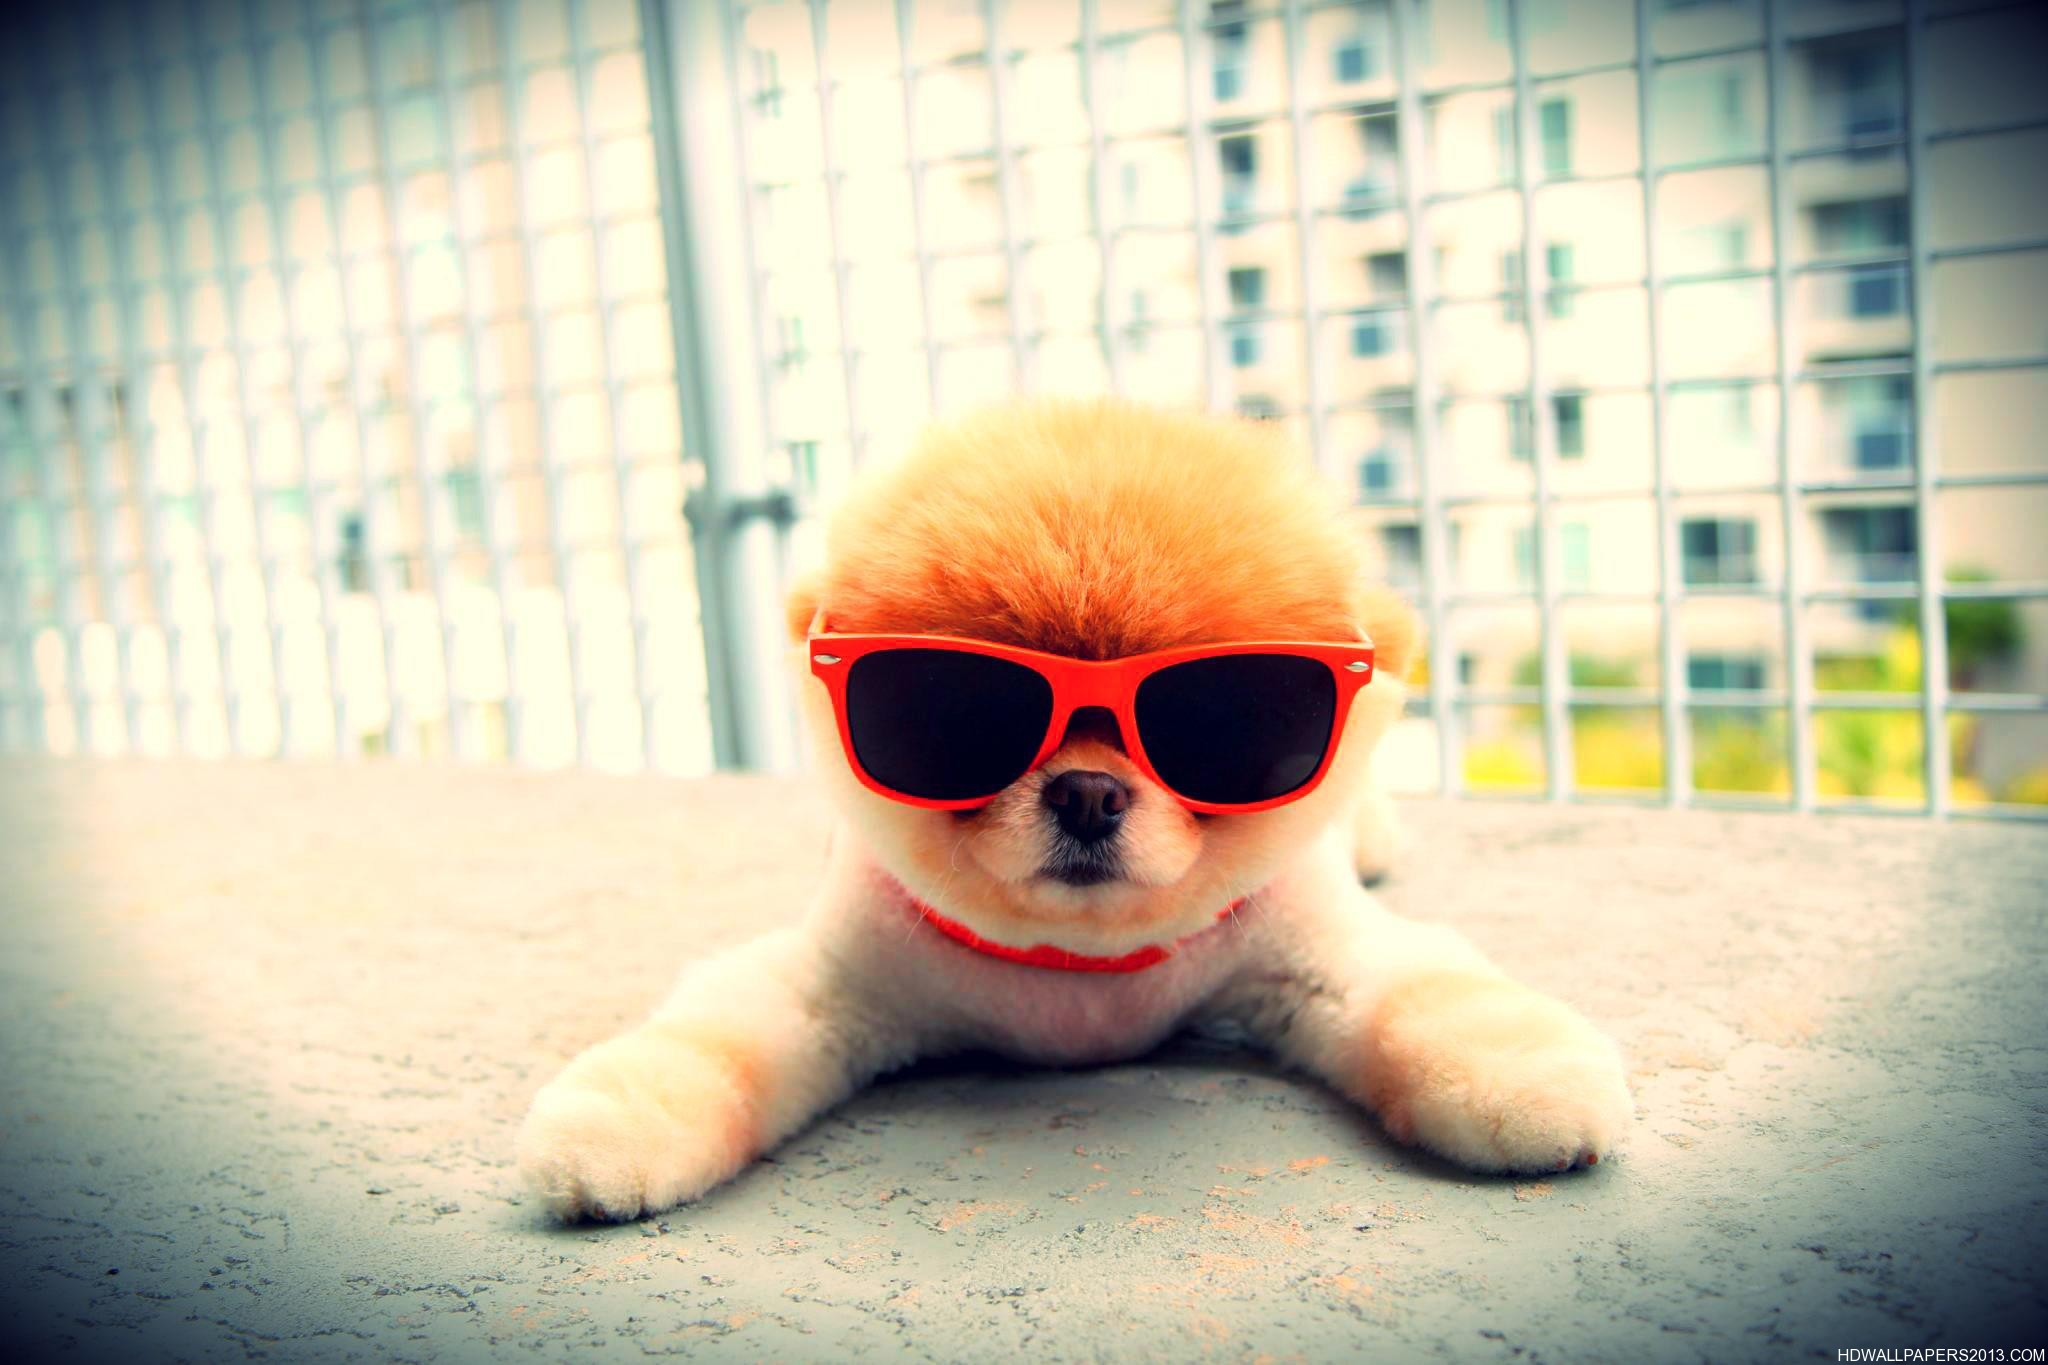 Super Cool Puppy | High Definition Wallpapers, High ...